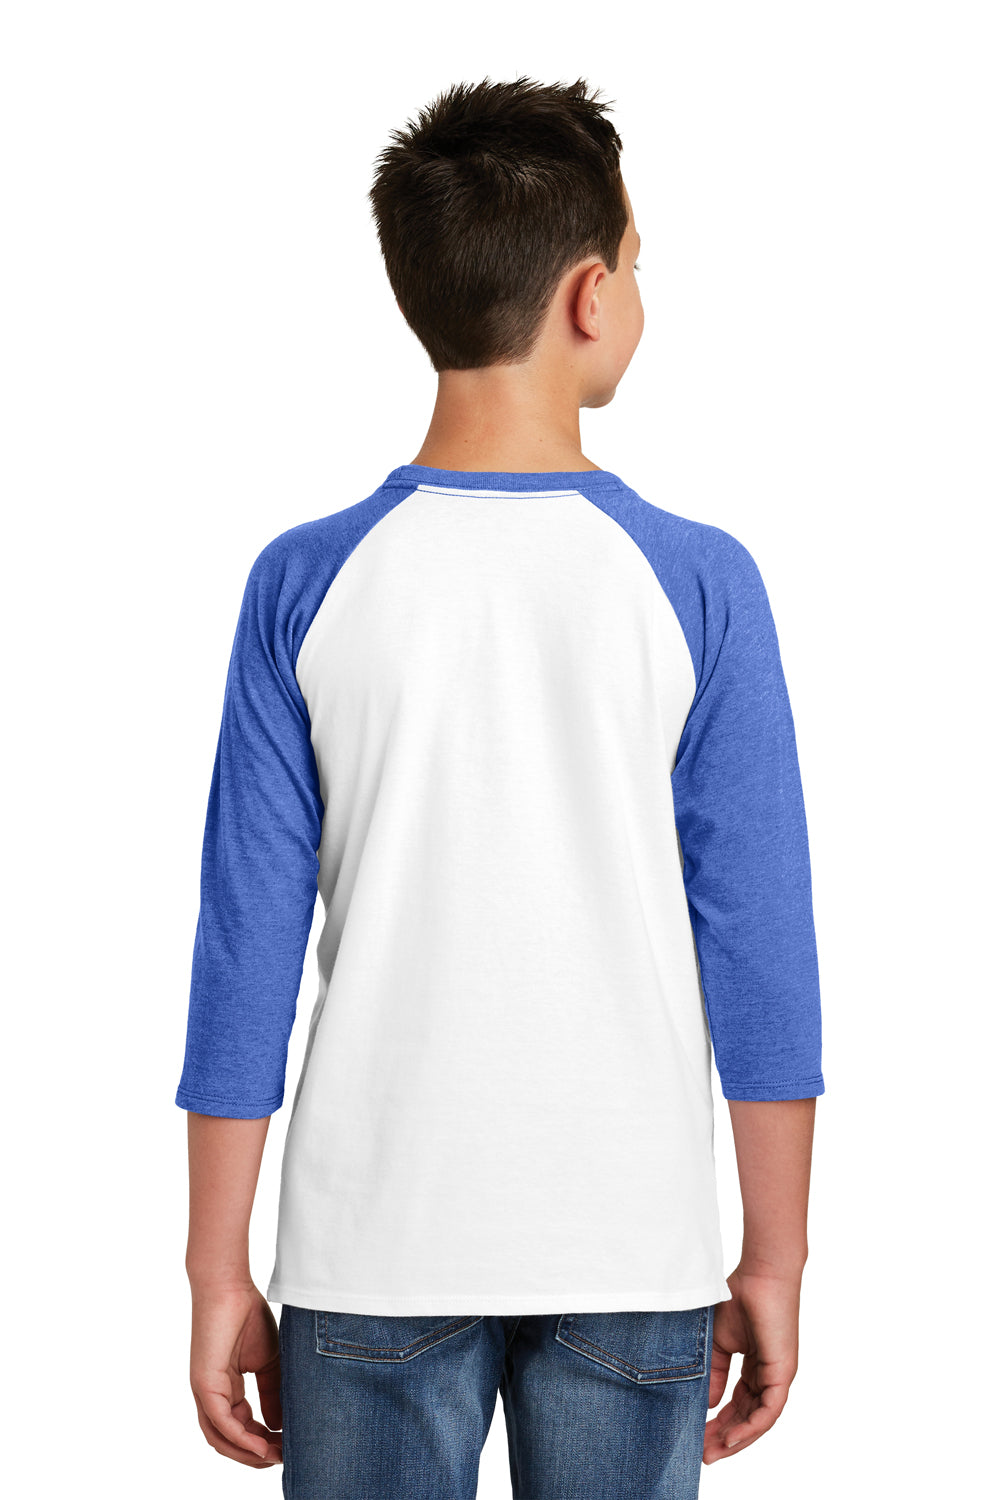 District DT6210Y Youth Very Important 3/4 Sleeve Crewneck T-Shirt White/Heather Royal Blue Back